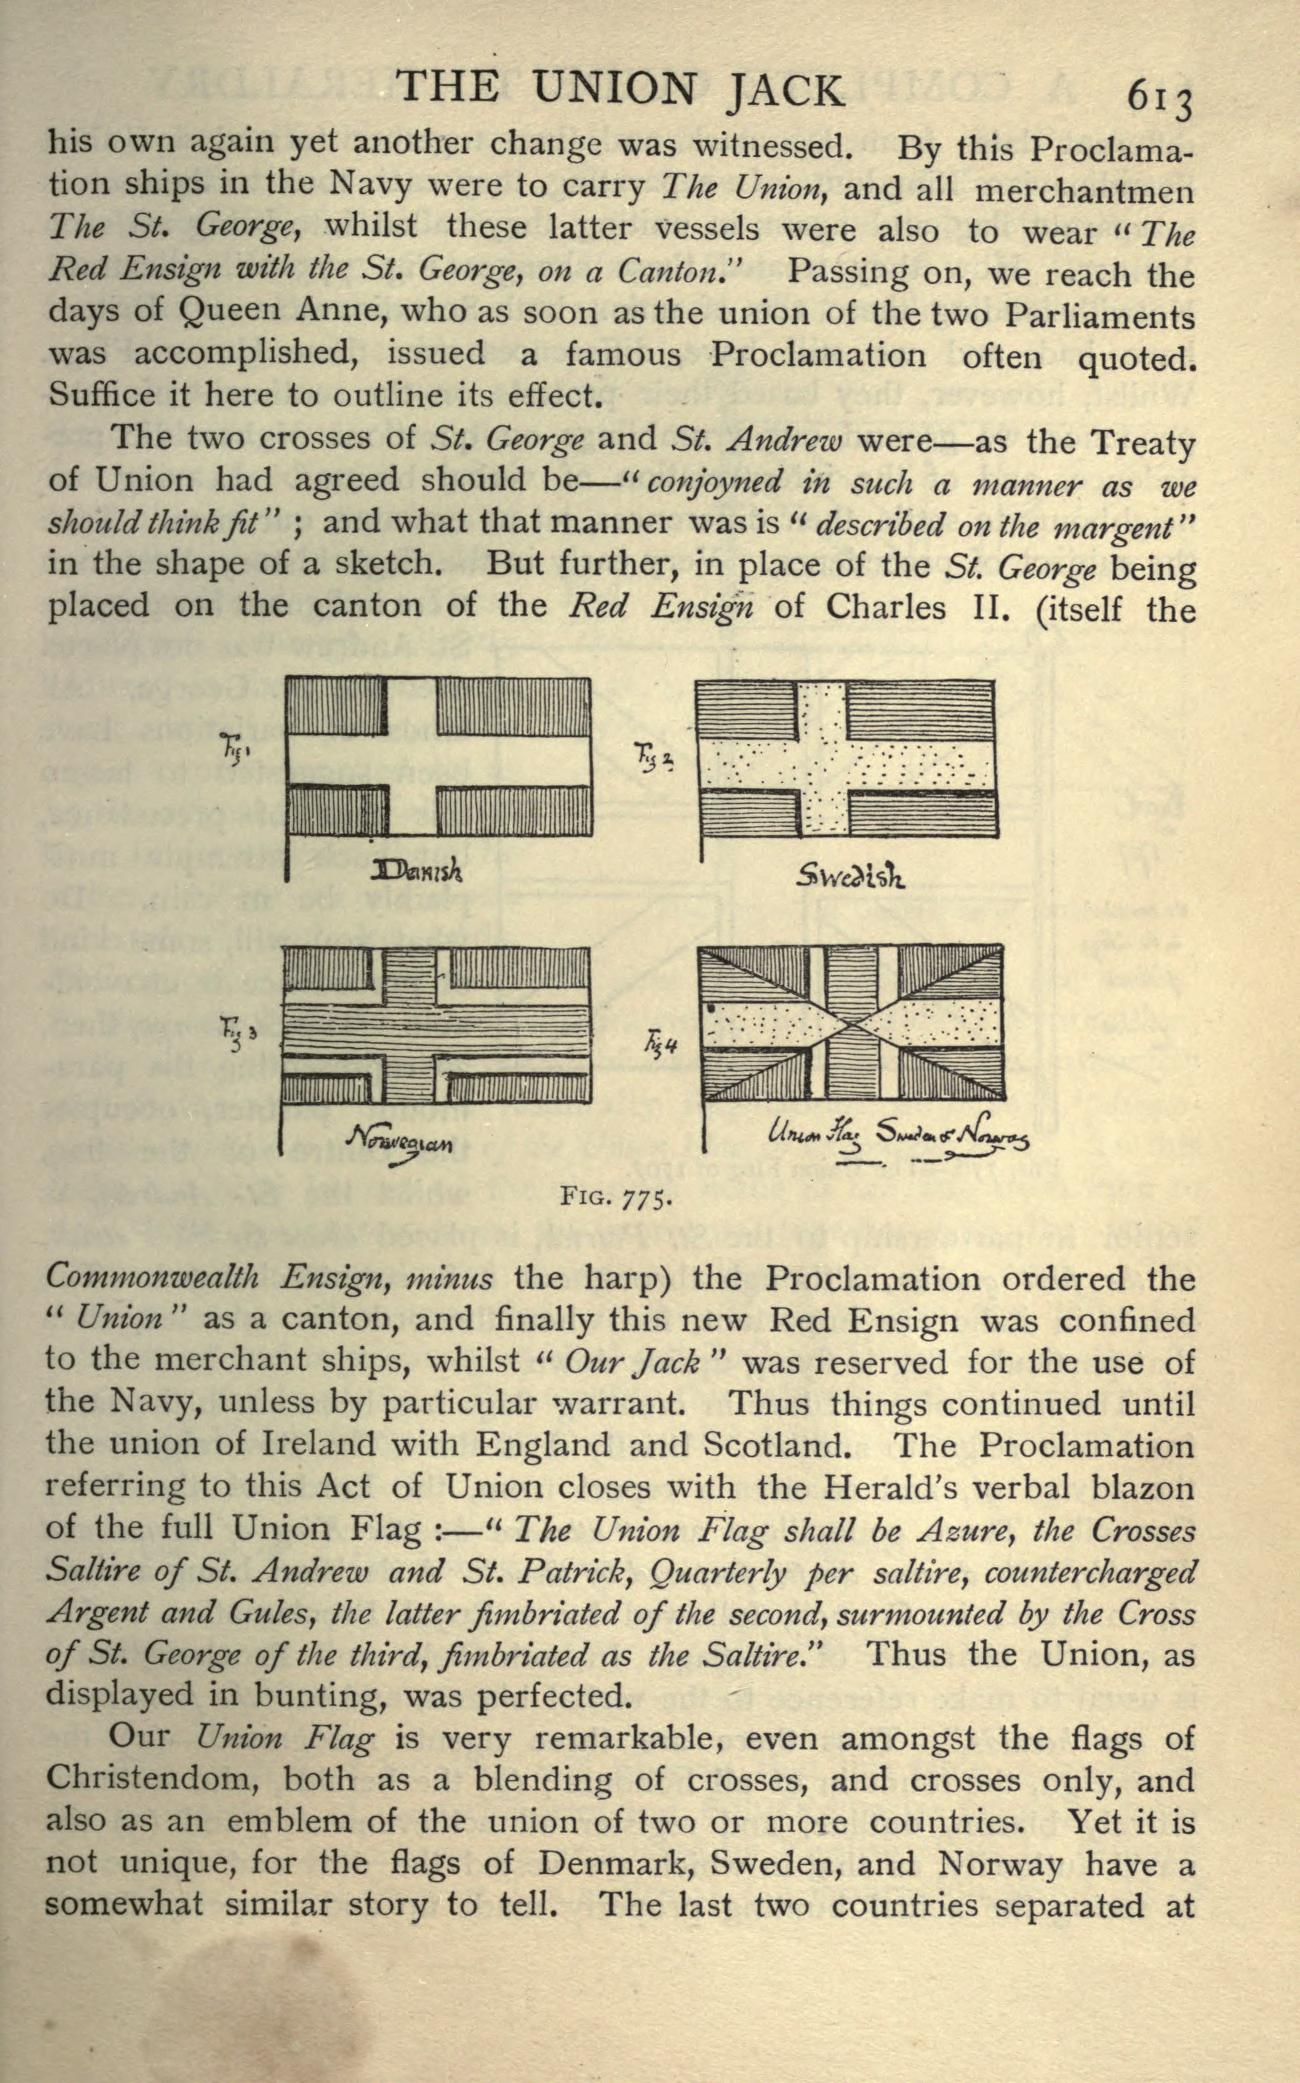 Image of A Complete Guide To Heraldry 1909 Union Jack Pg613